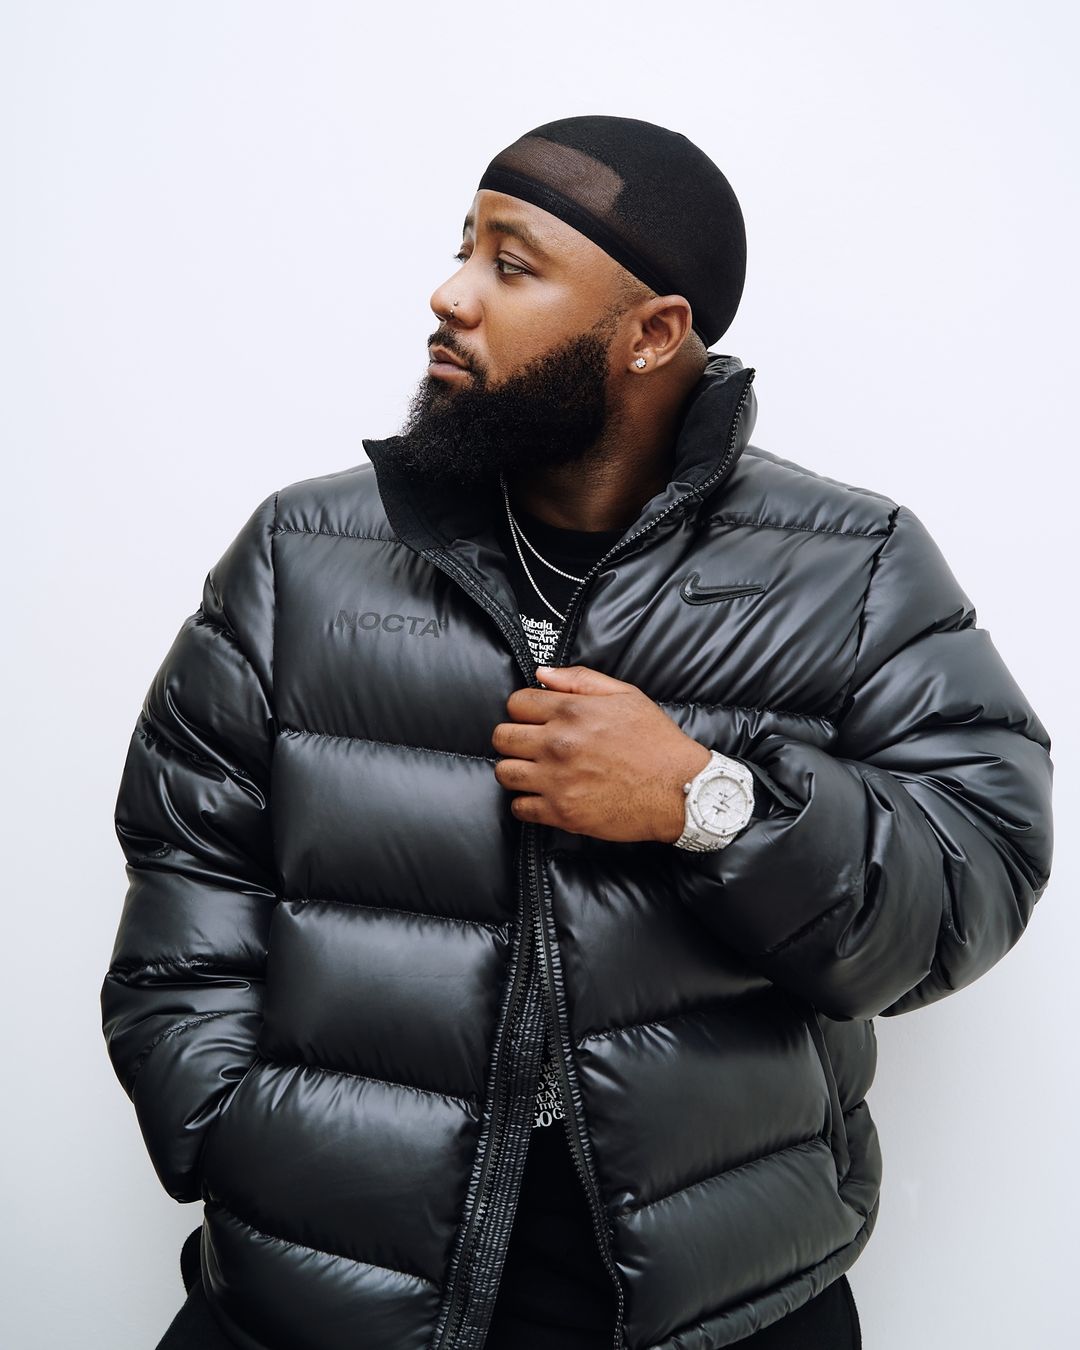 Cassper Nyovest – Hip hop needs me, but I’ll stay on Amapiano side